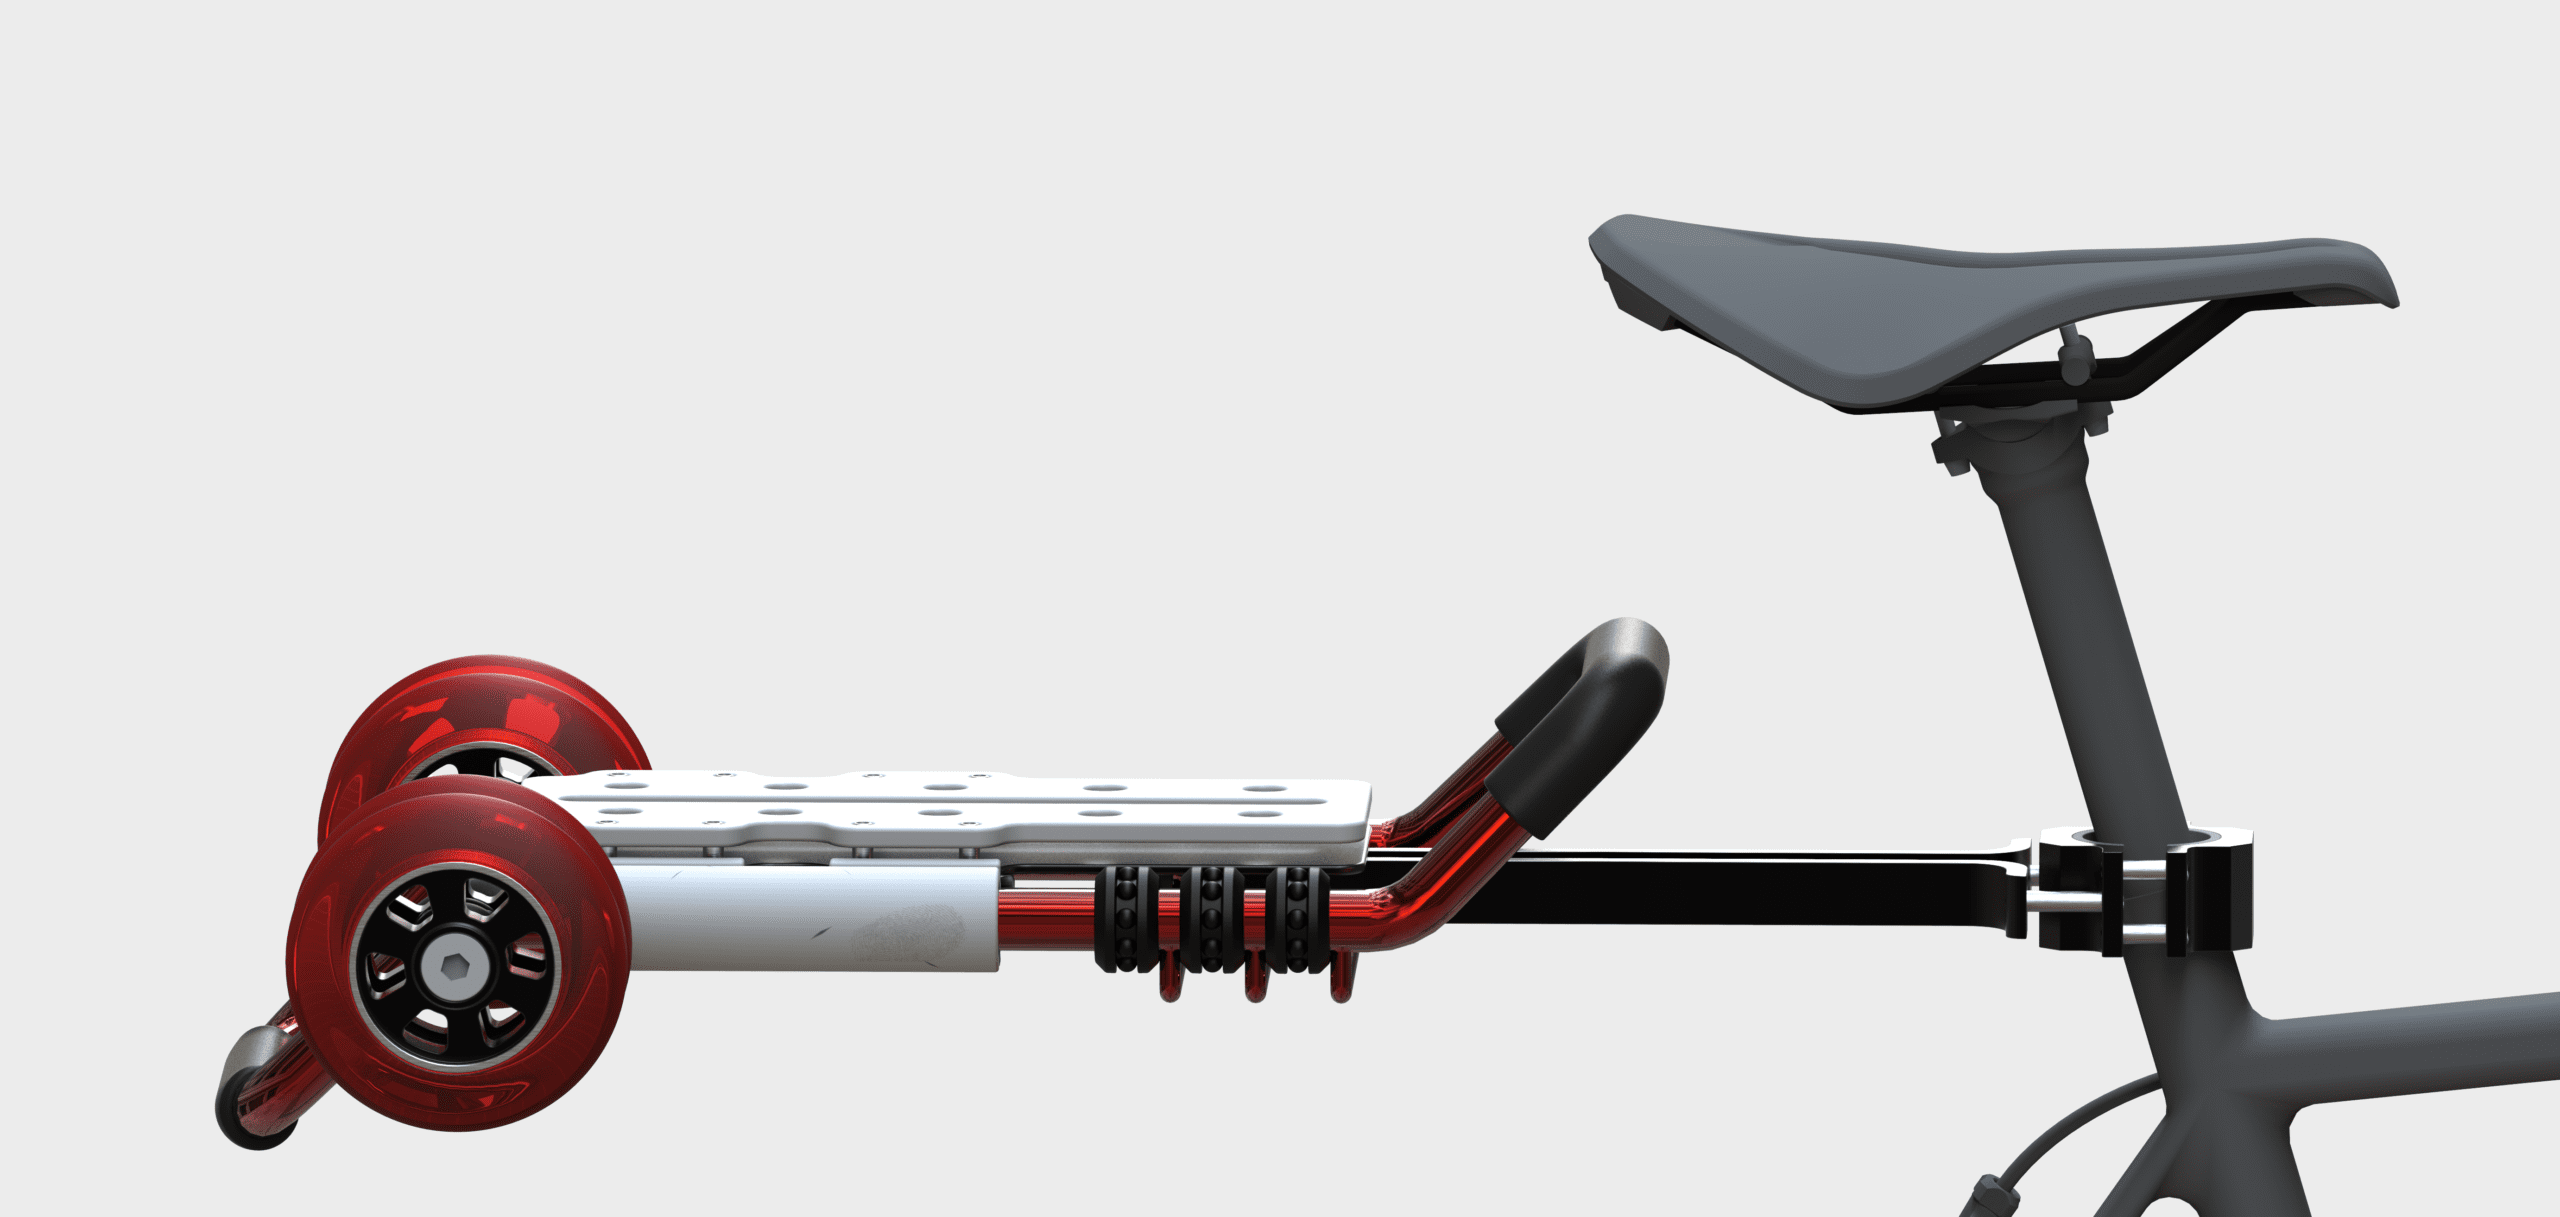 Digital image of a bike seat and bike rack. The bike is black with a sleek grey seat. The rack has a back connecting bar, white base, two red wheels in the back and two red bars in the front with black grips.